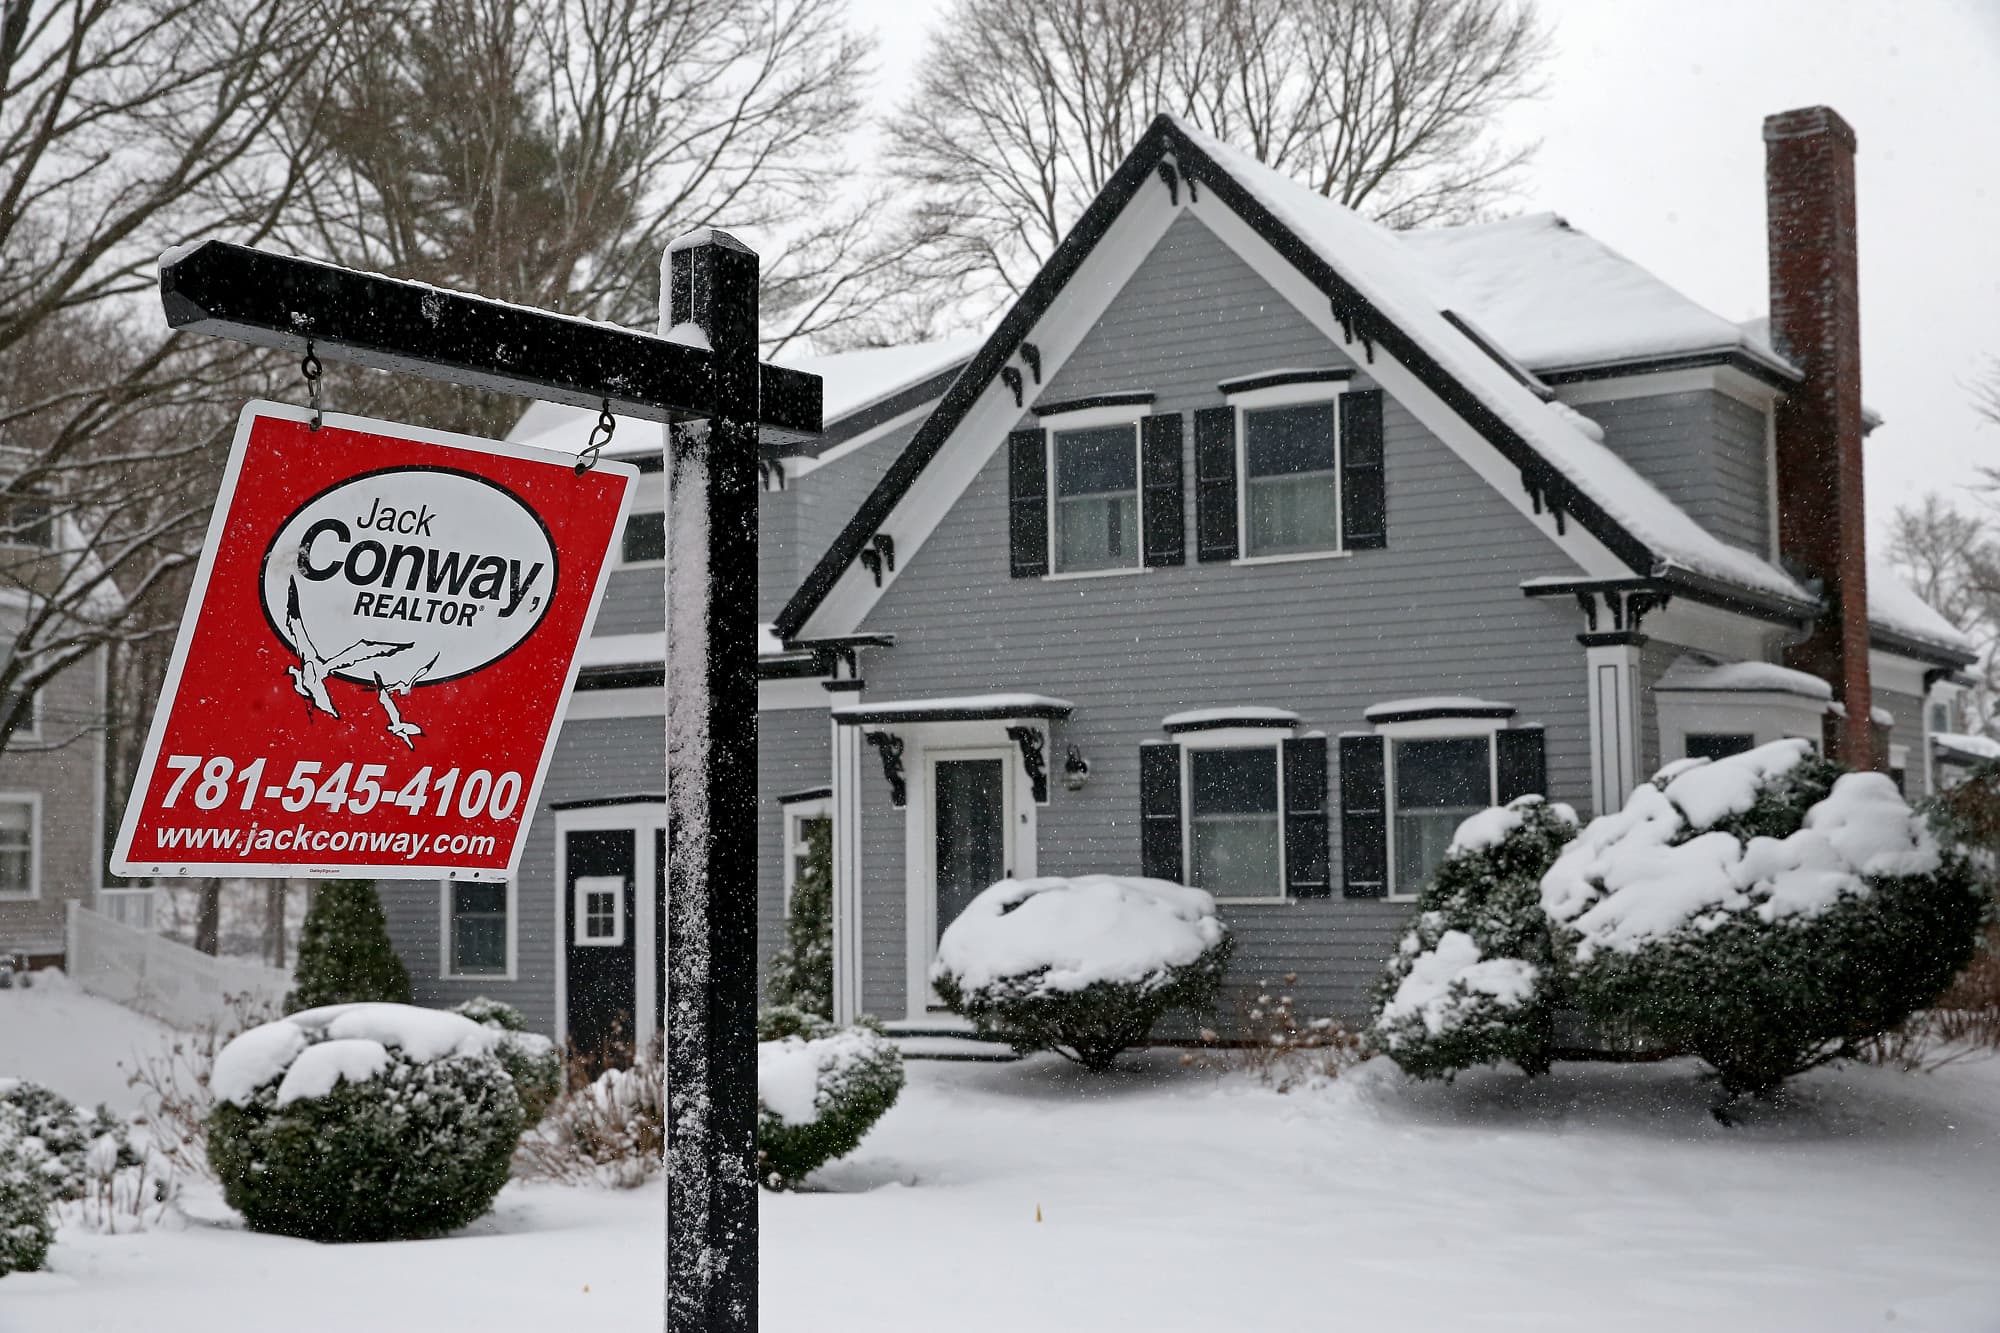 Existing home sales increase slightly in January, but record low supply weighs on the market